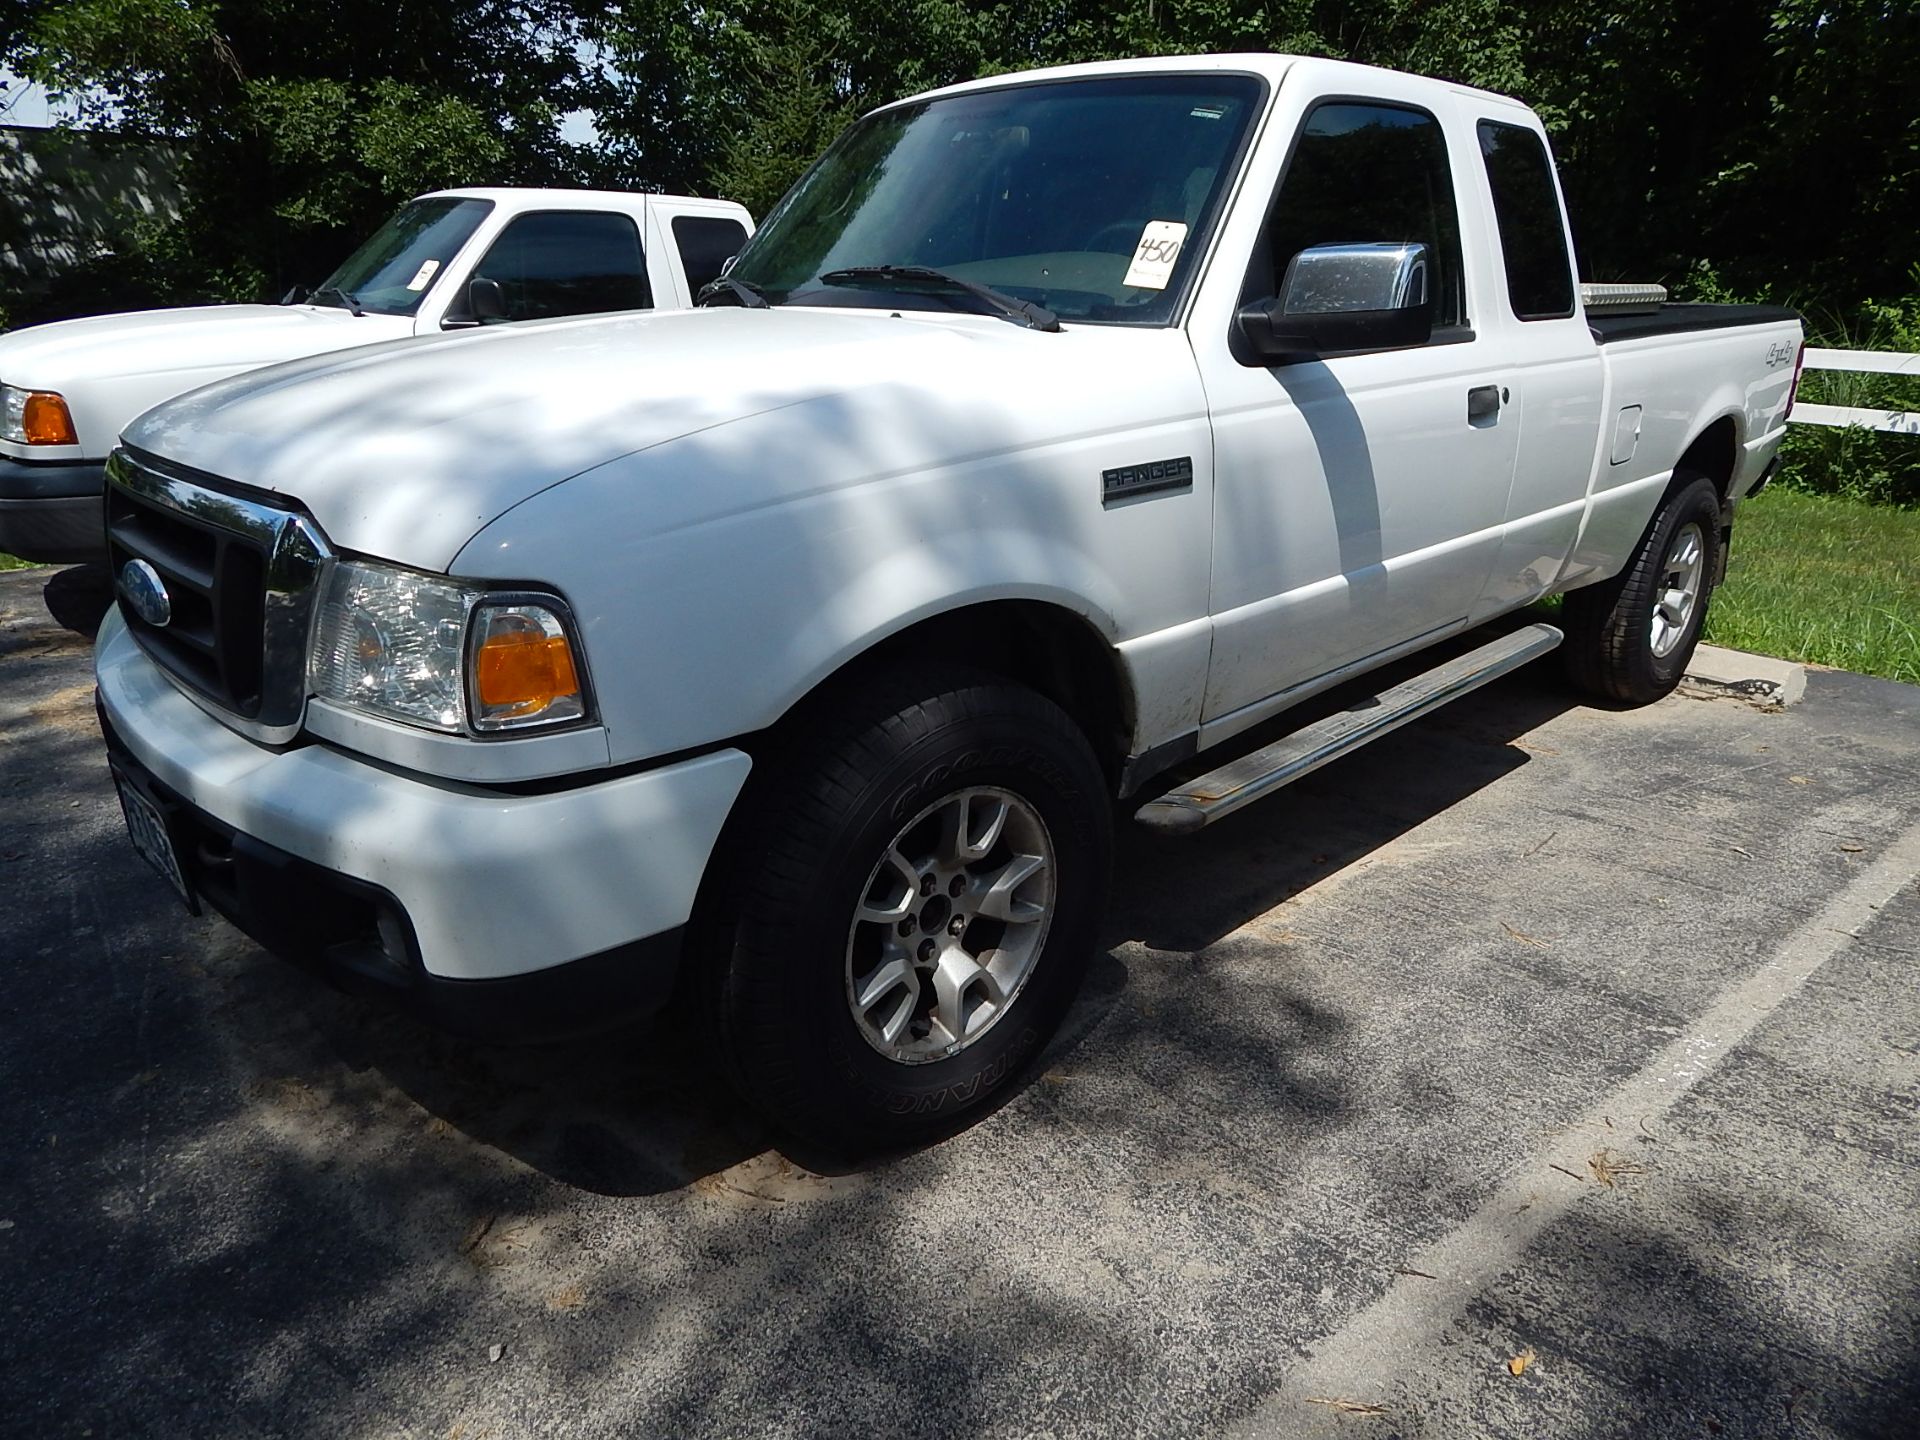 2006 Ford Ranger XLT Pick-Up, VIN 1FTZR15E57PAO1346, Extended Cab, 4WD Automatic, PW, PL, A/C, Am/ - Image 2 of 19